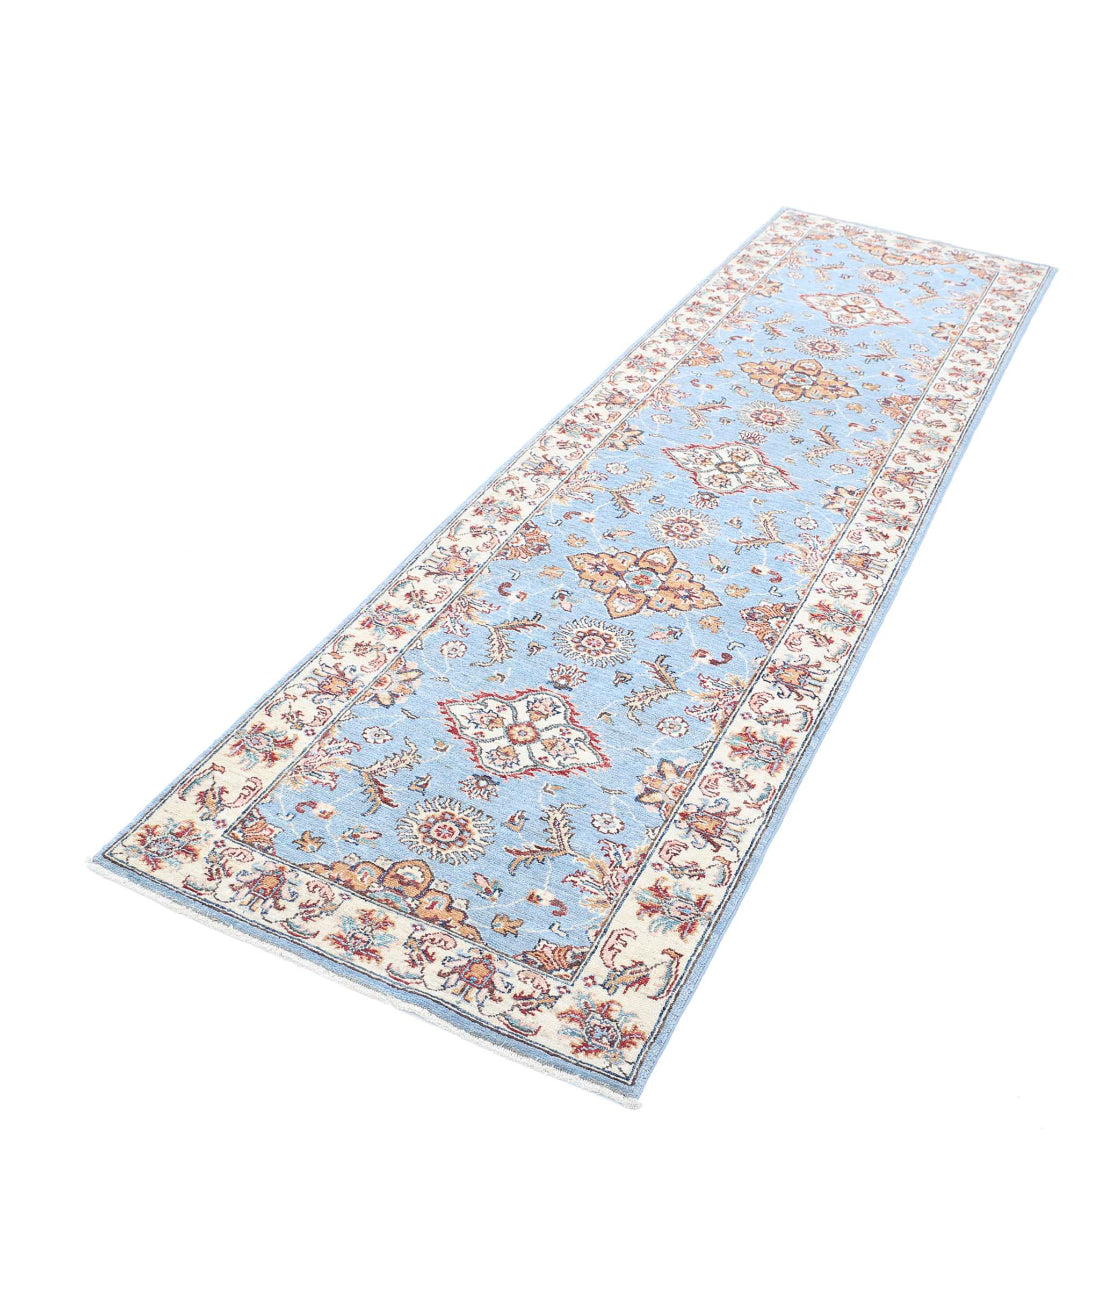 Ziegler 2'7'' X 9'7'' Hand-Knotted Wool Rug 2'7'' x 9'7'' (78 X 288) / Blue / Ivory